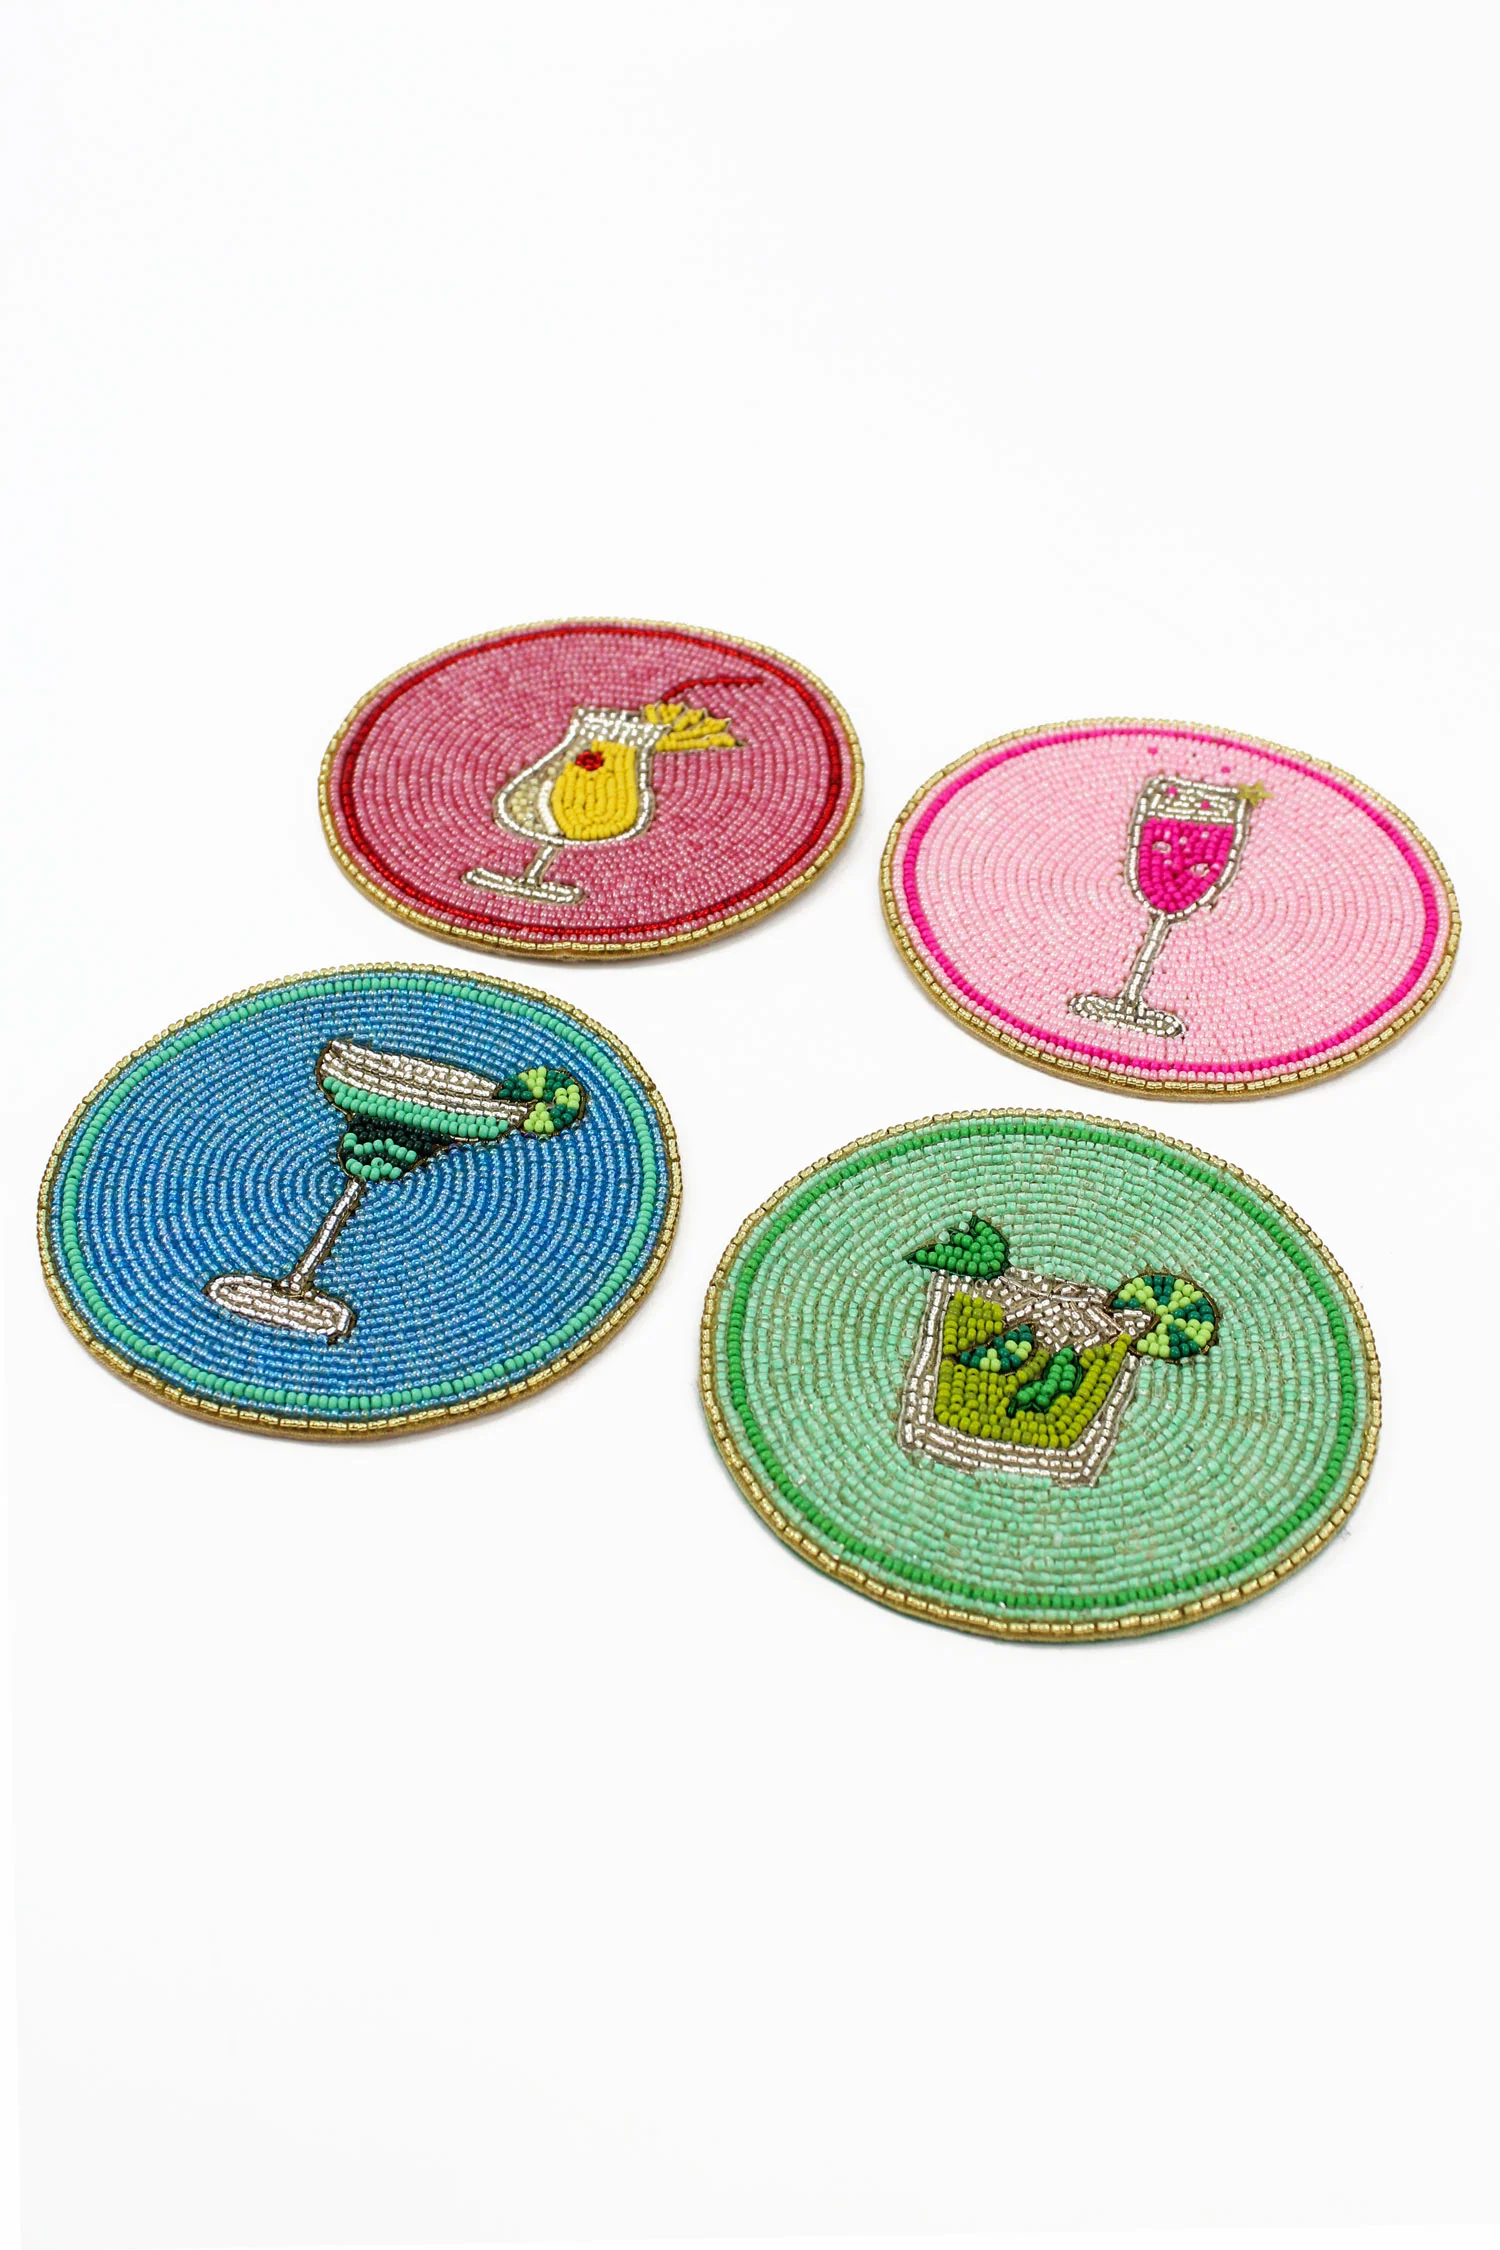 Cocktail Beaded Coasters set of 4